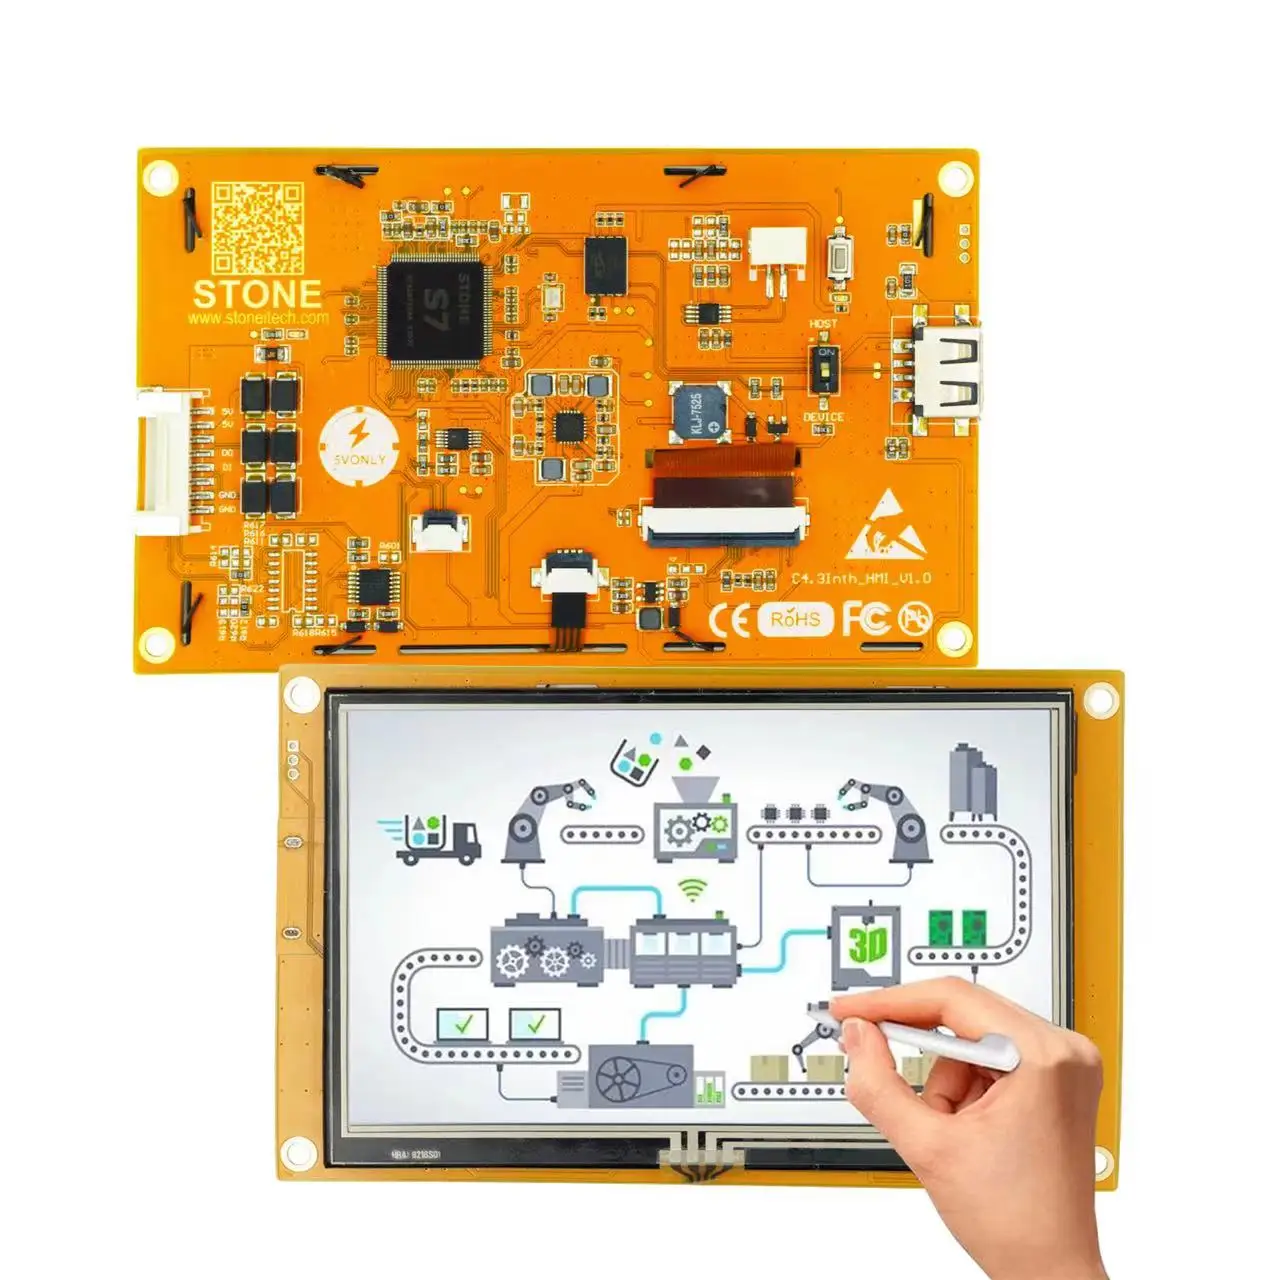 TFT LCD Touch Panel with Controller and Programme UART MCU Rs232 Interface for Raspberry for Equipment Control